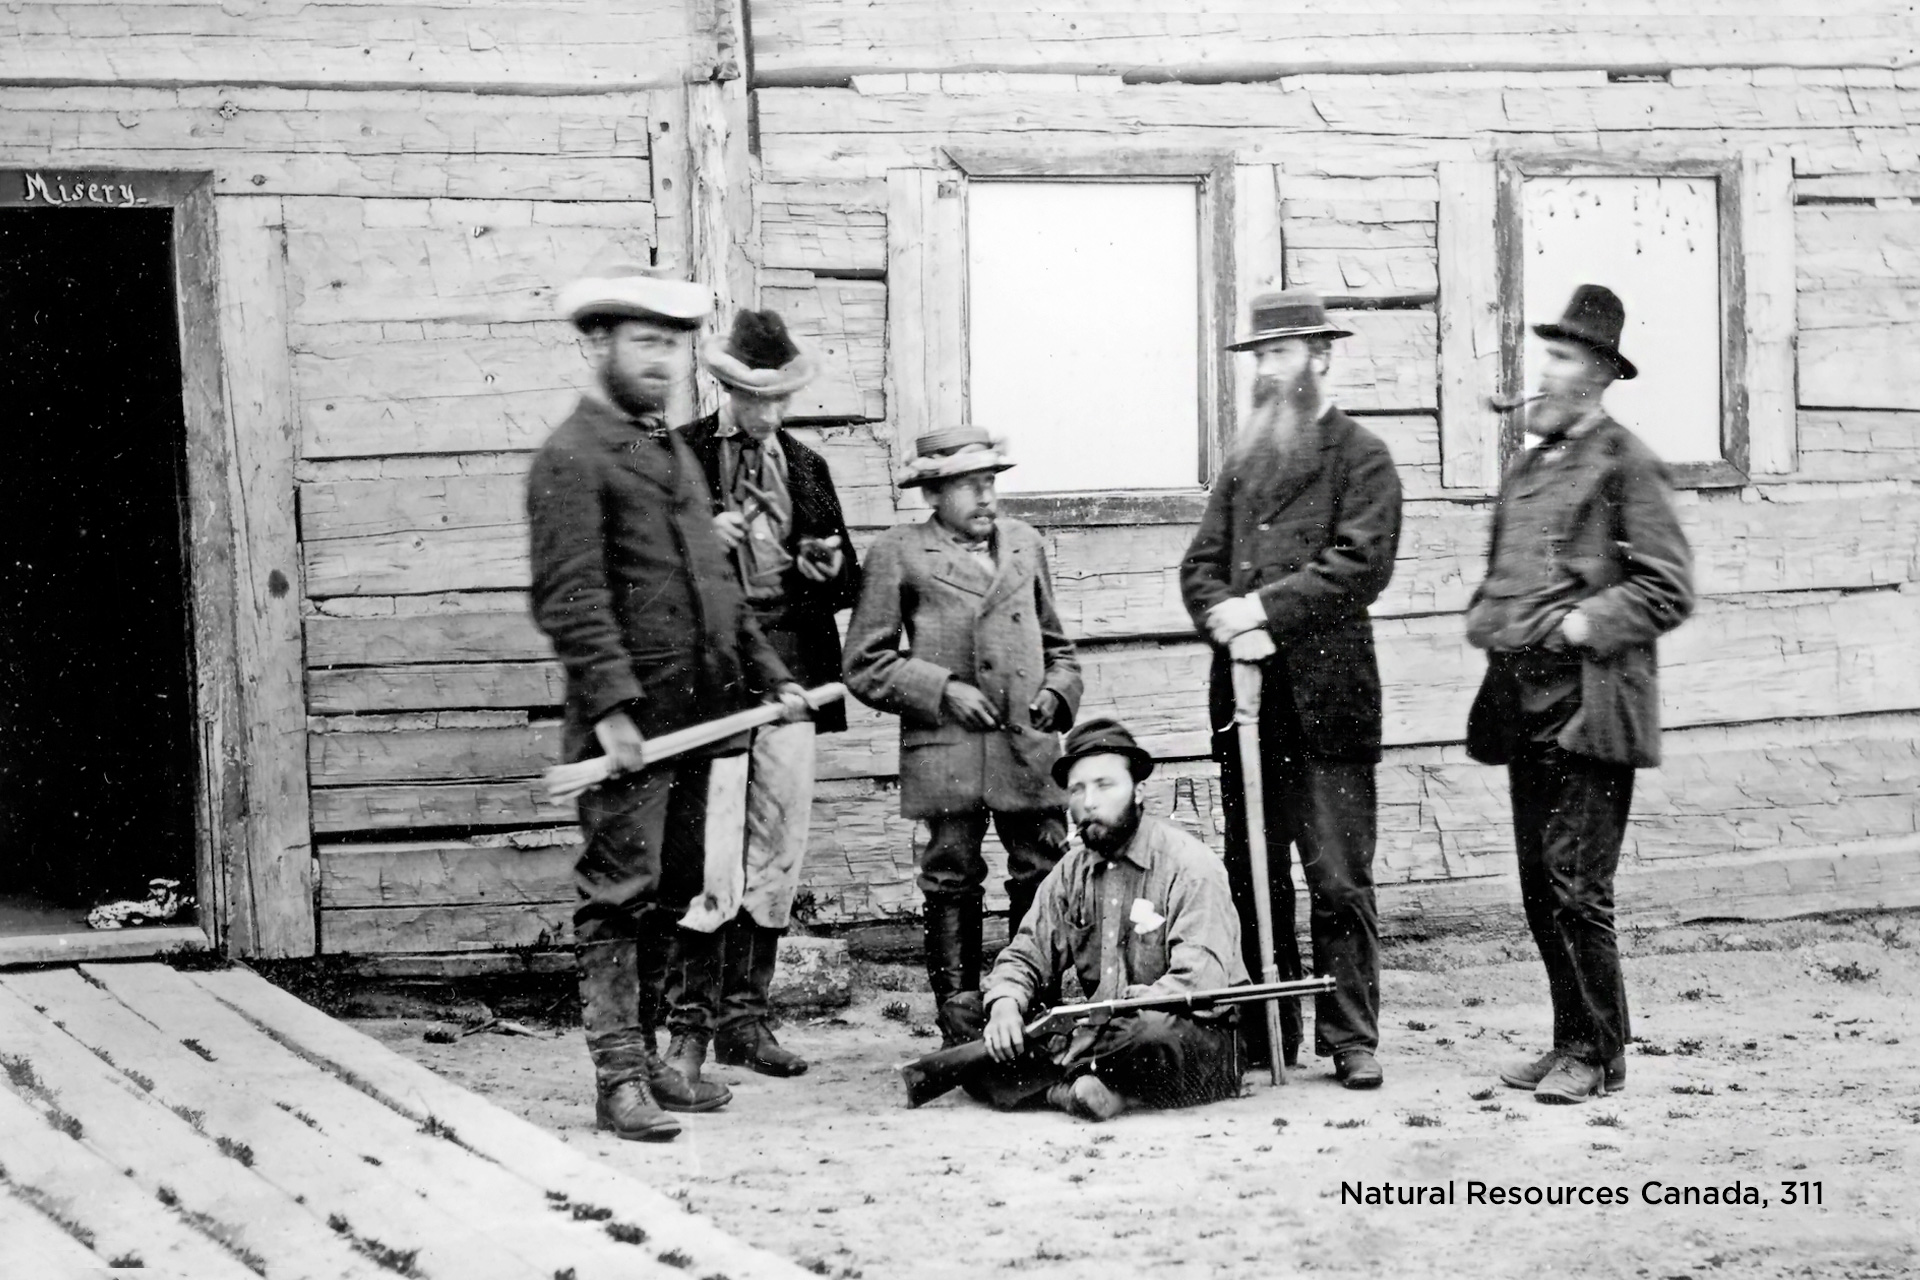 George Dawson and party at Fort McLeod, B.C., 1879.